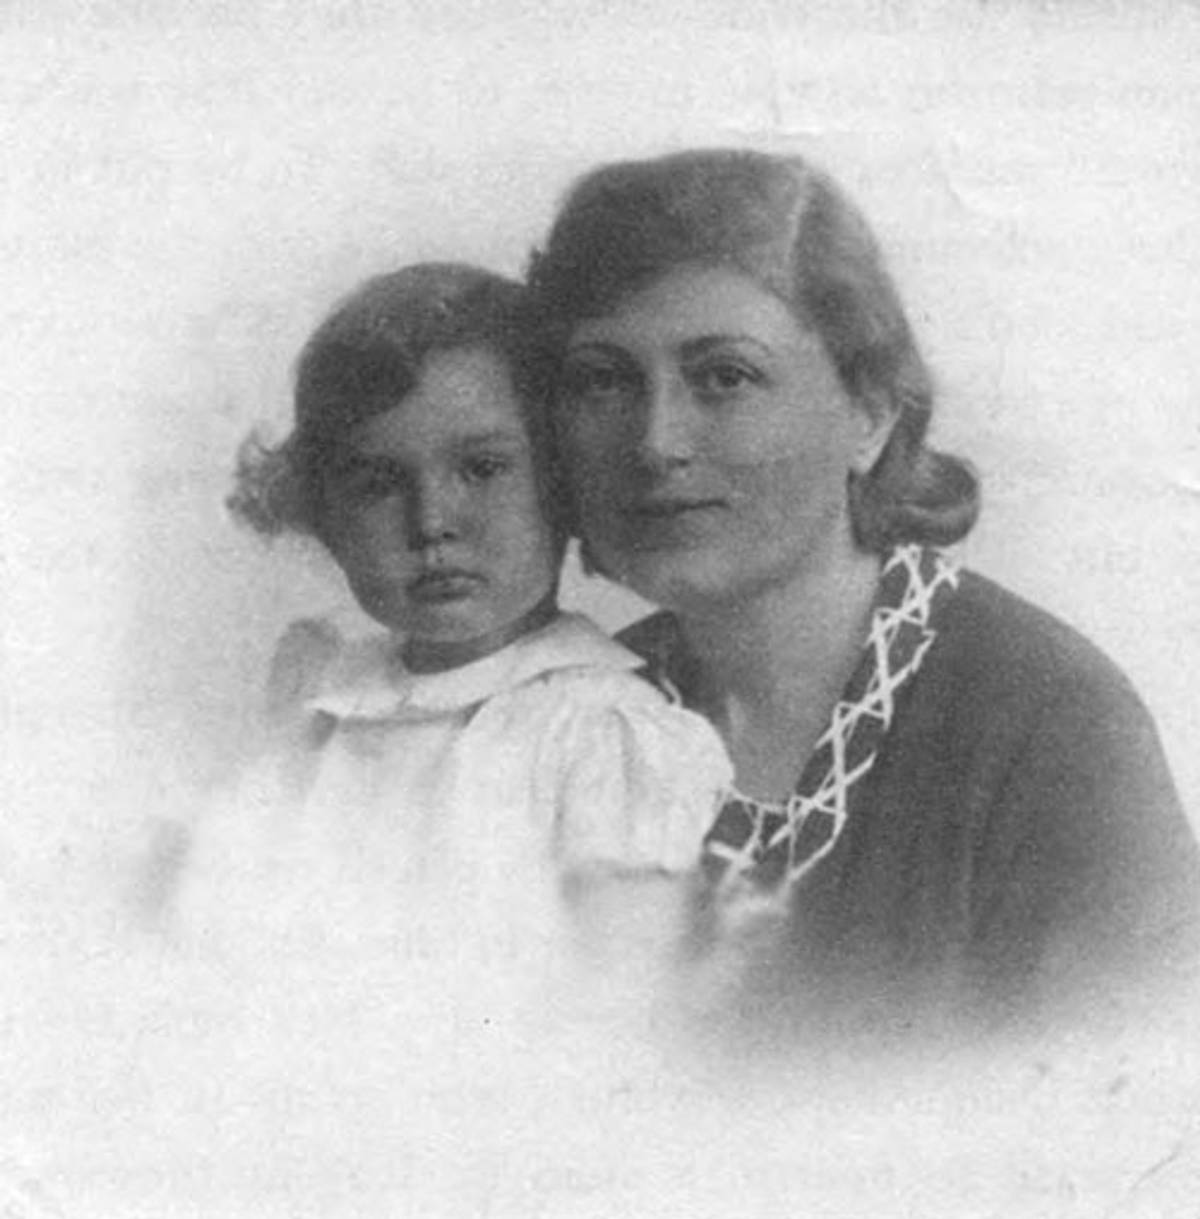 Ray and her daughter Joy (Photo courtesy Pegasus Books)